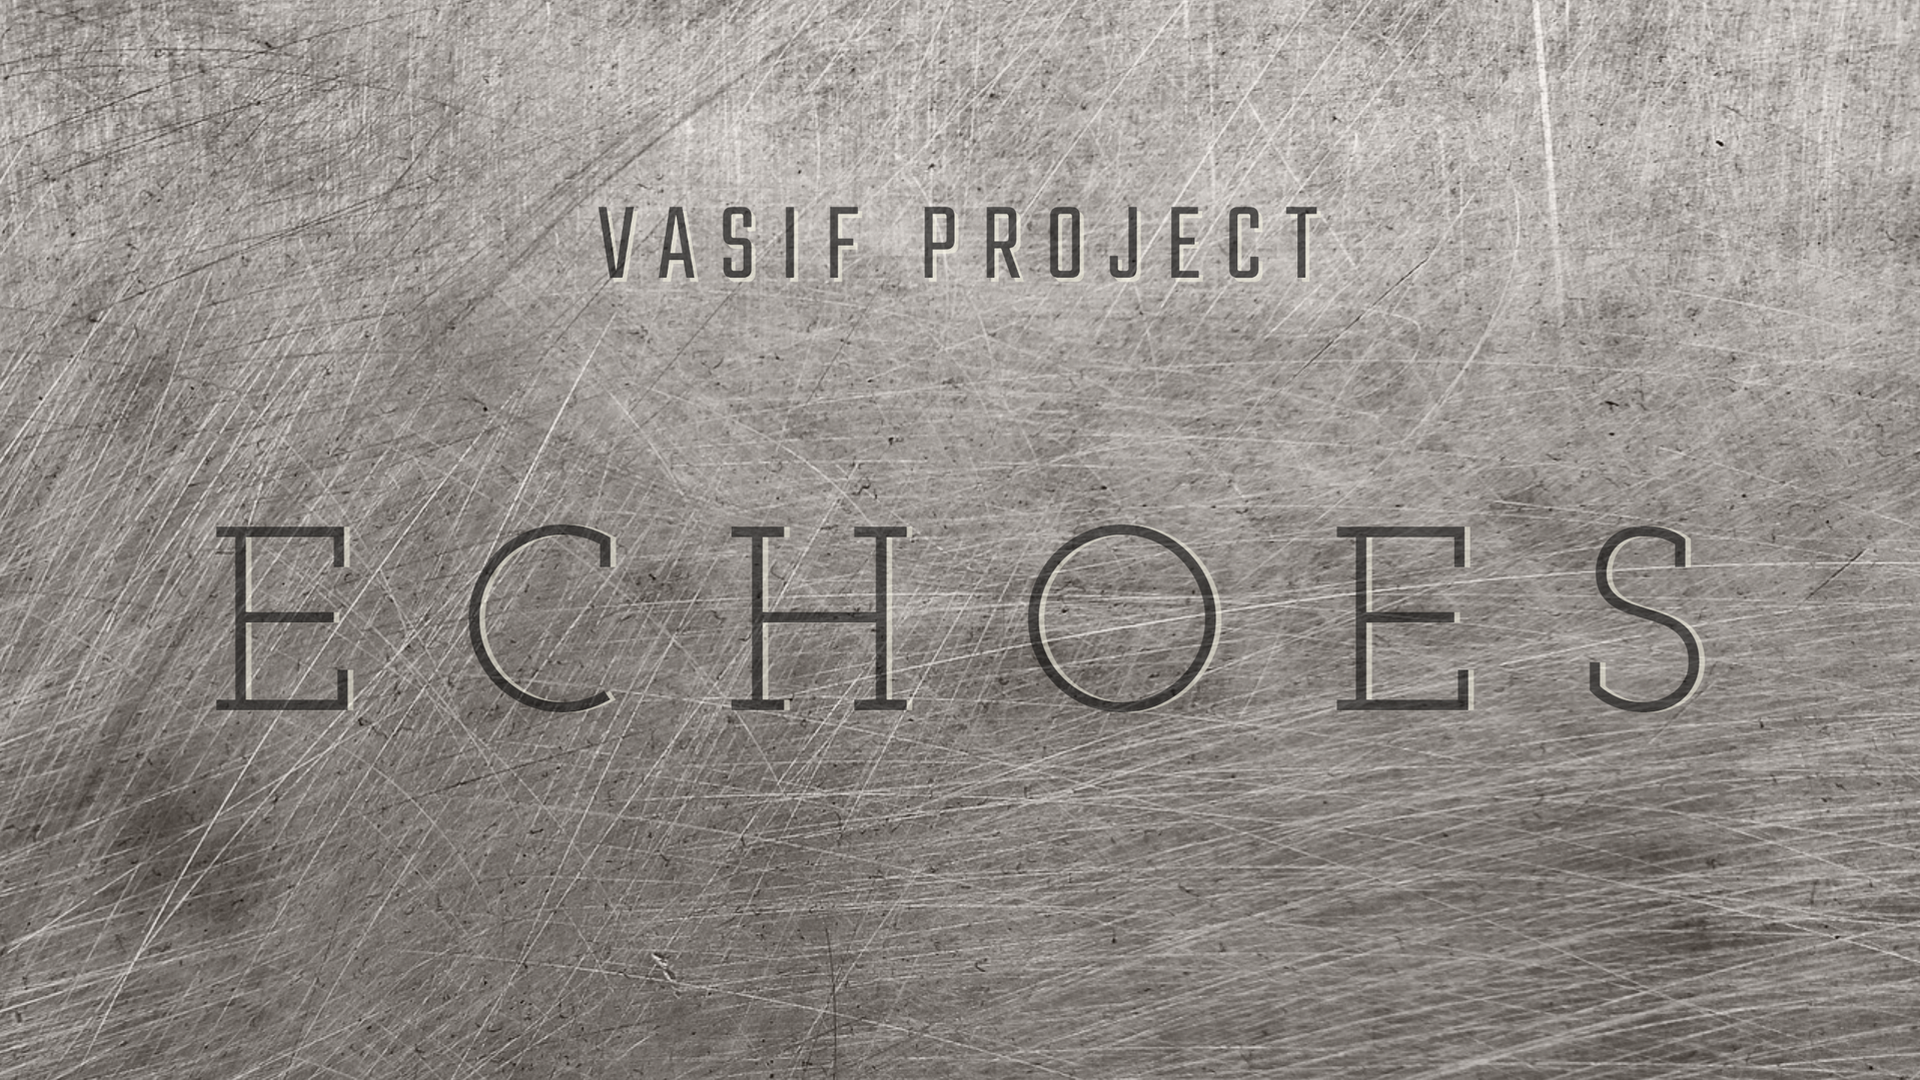 Vasif Project: Echoes